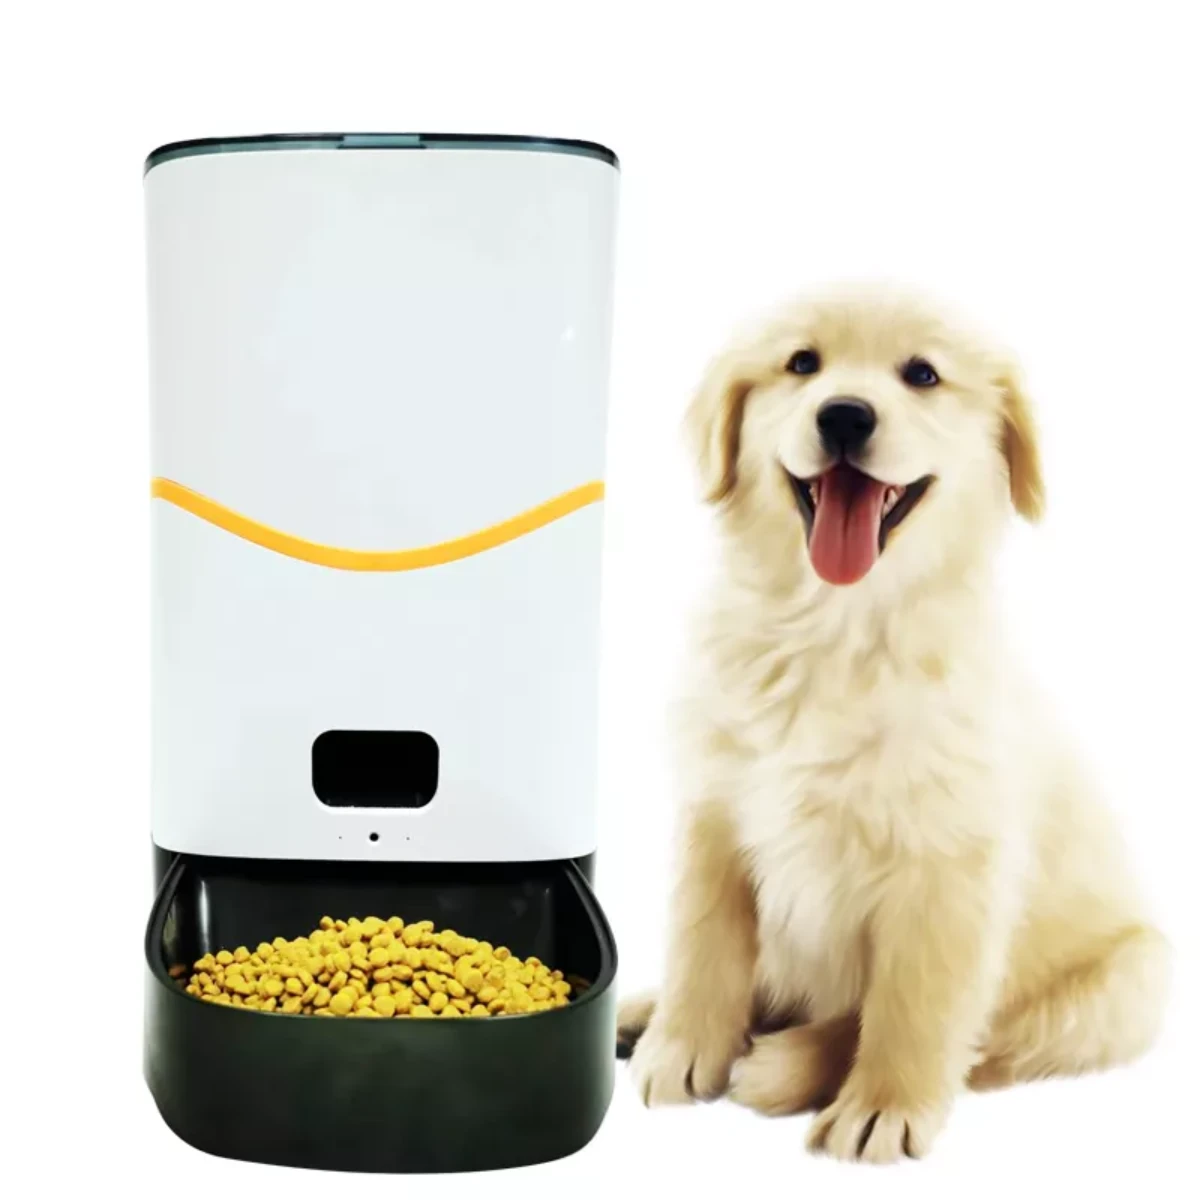 Amazon 2020 New Arrival 5L Smart  Automatic Pet Dog Feeder Food Feeder